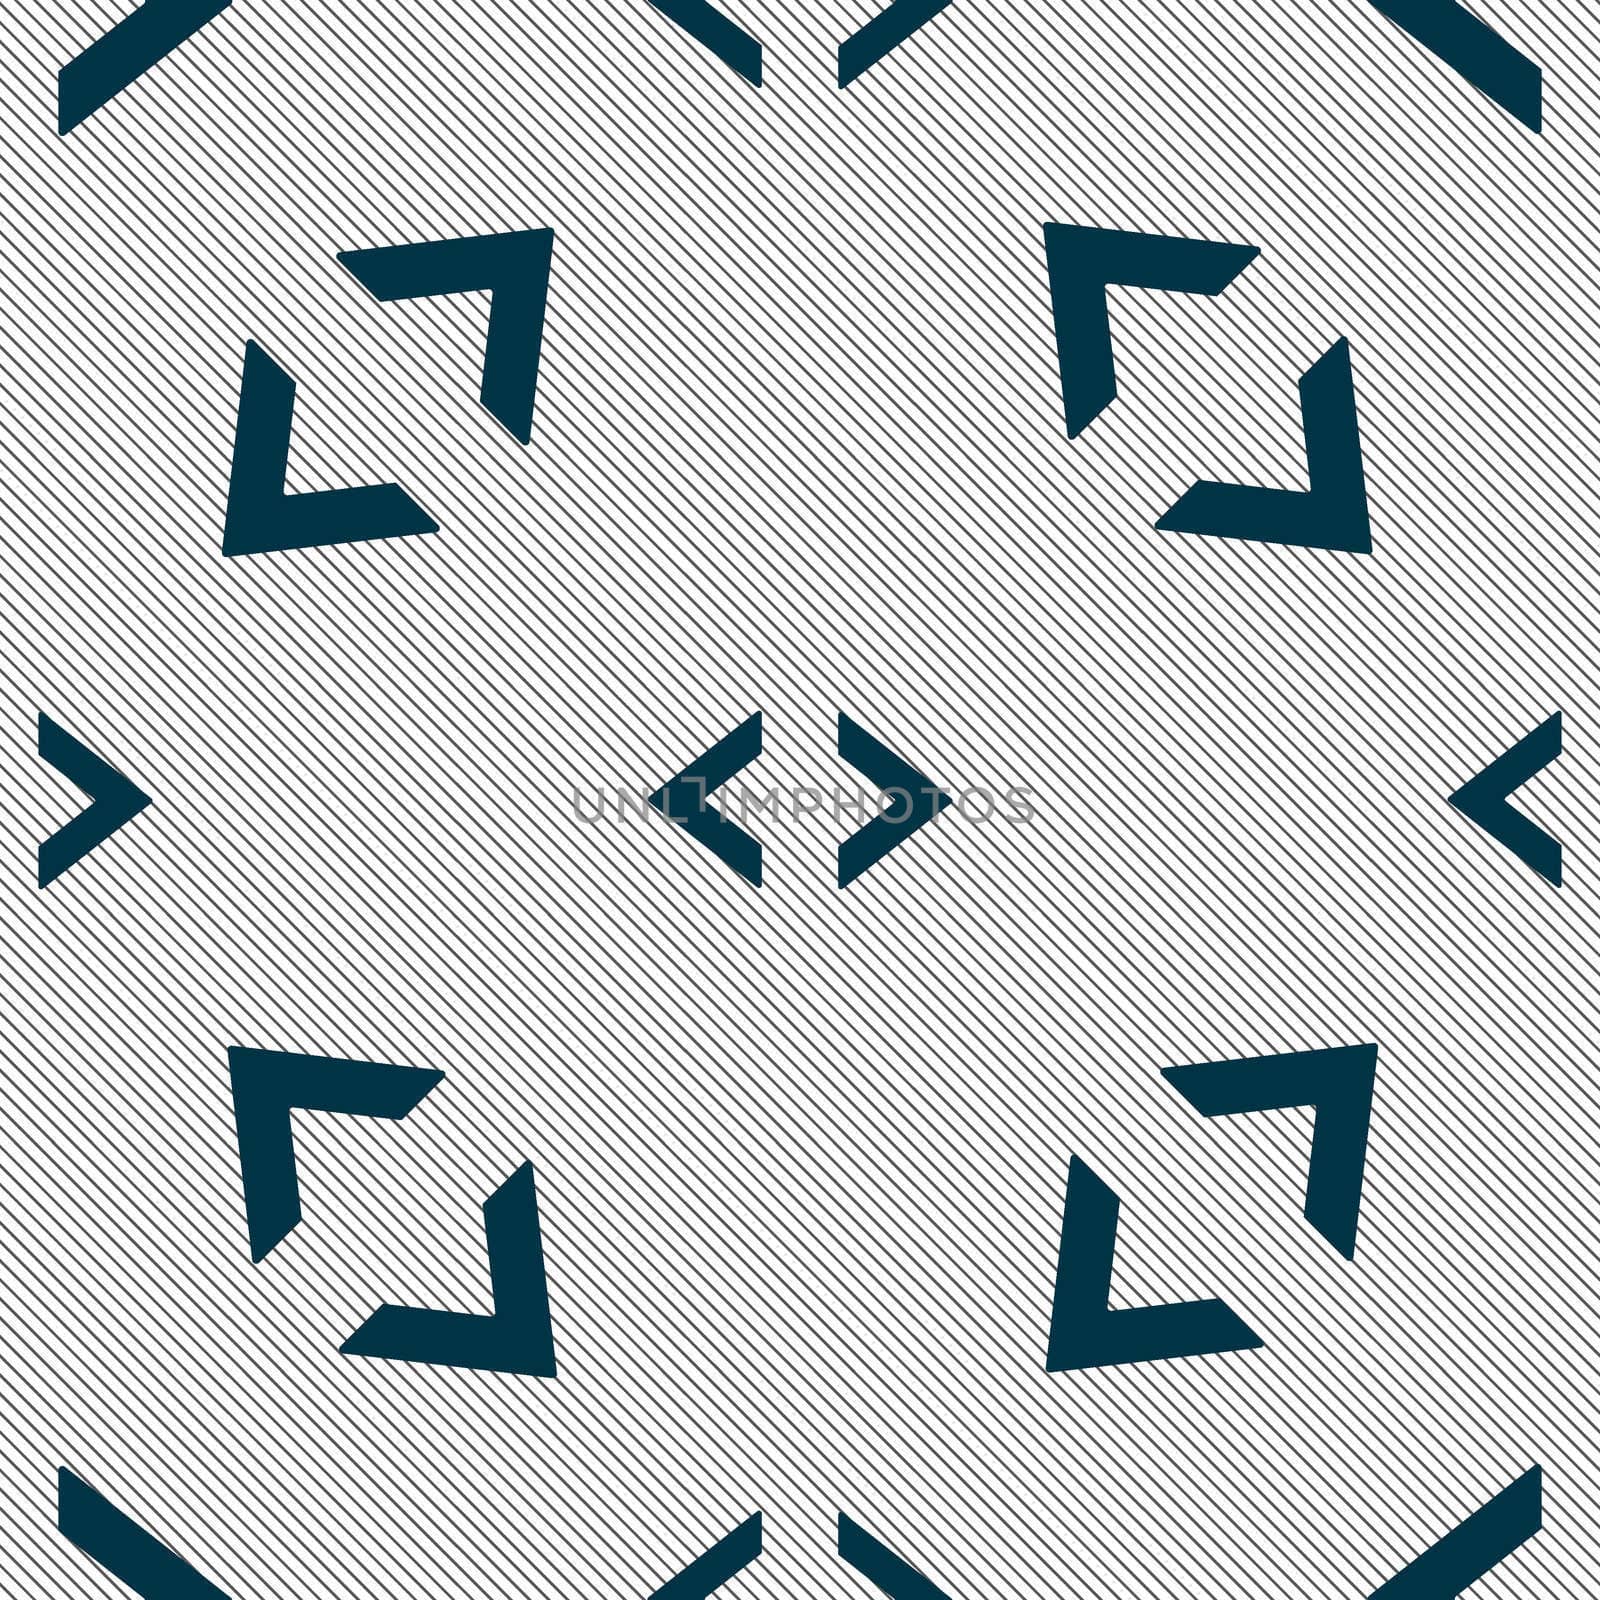 Code sign icon. Programmer symbol. Seamless pattern with geometric texture.  by serhii_lohvyniuk